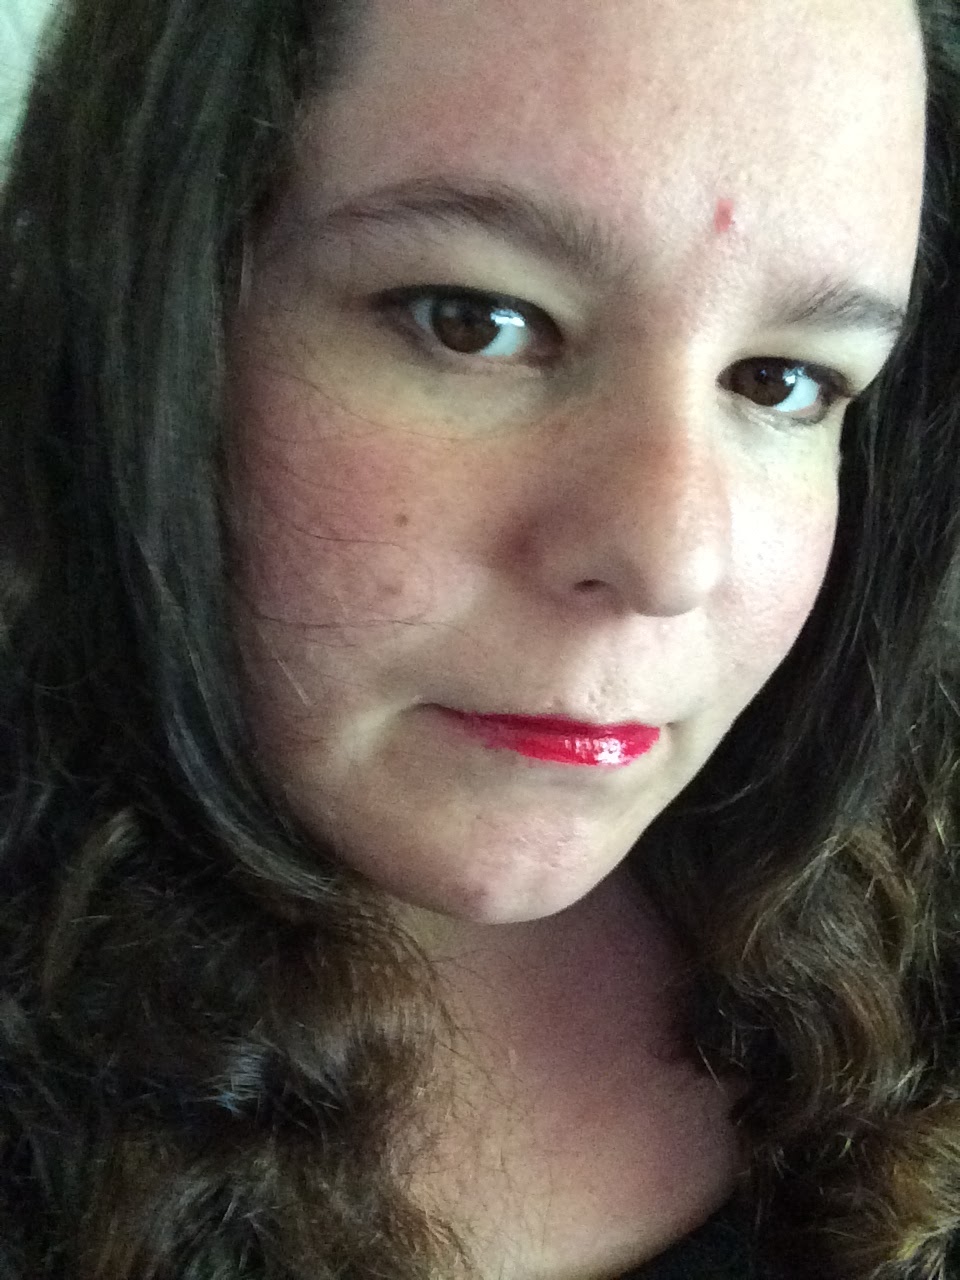 Wet n Wild Vicious Varnish Lip Stain Review